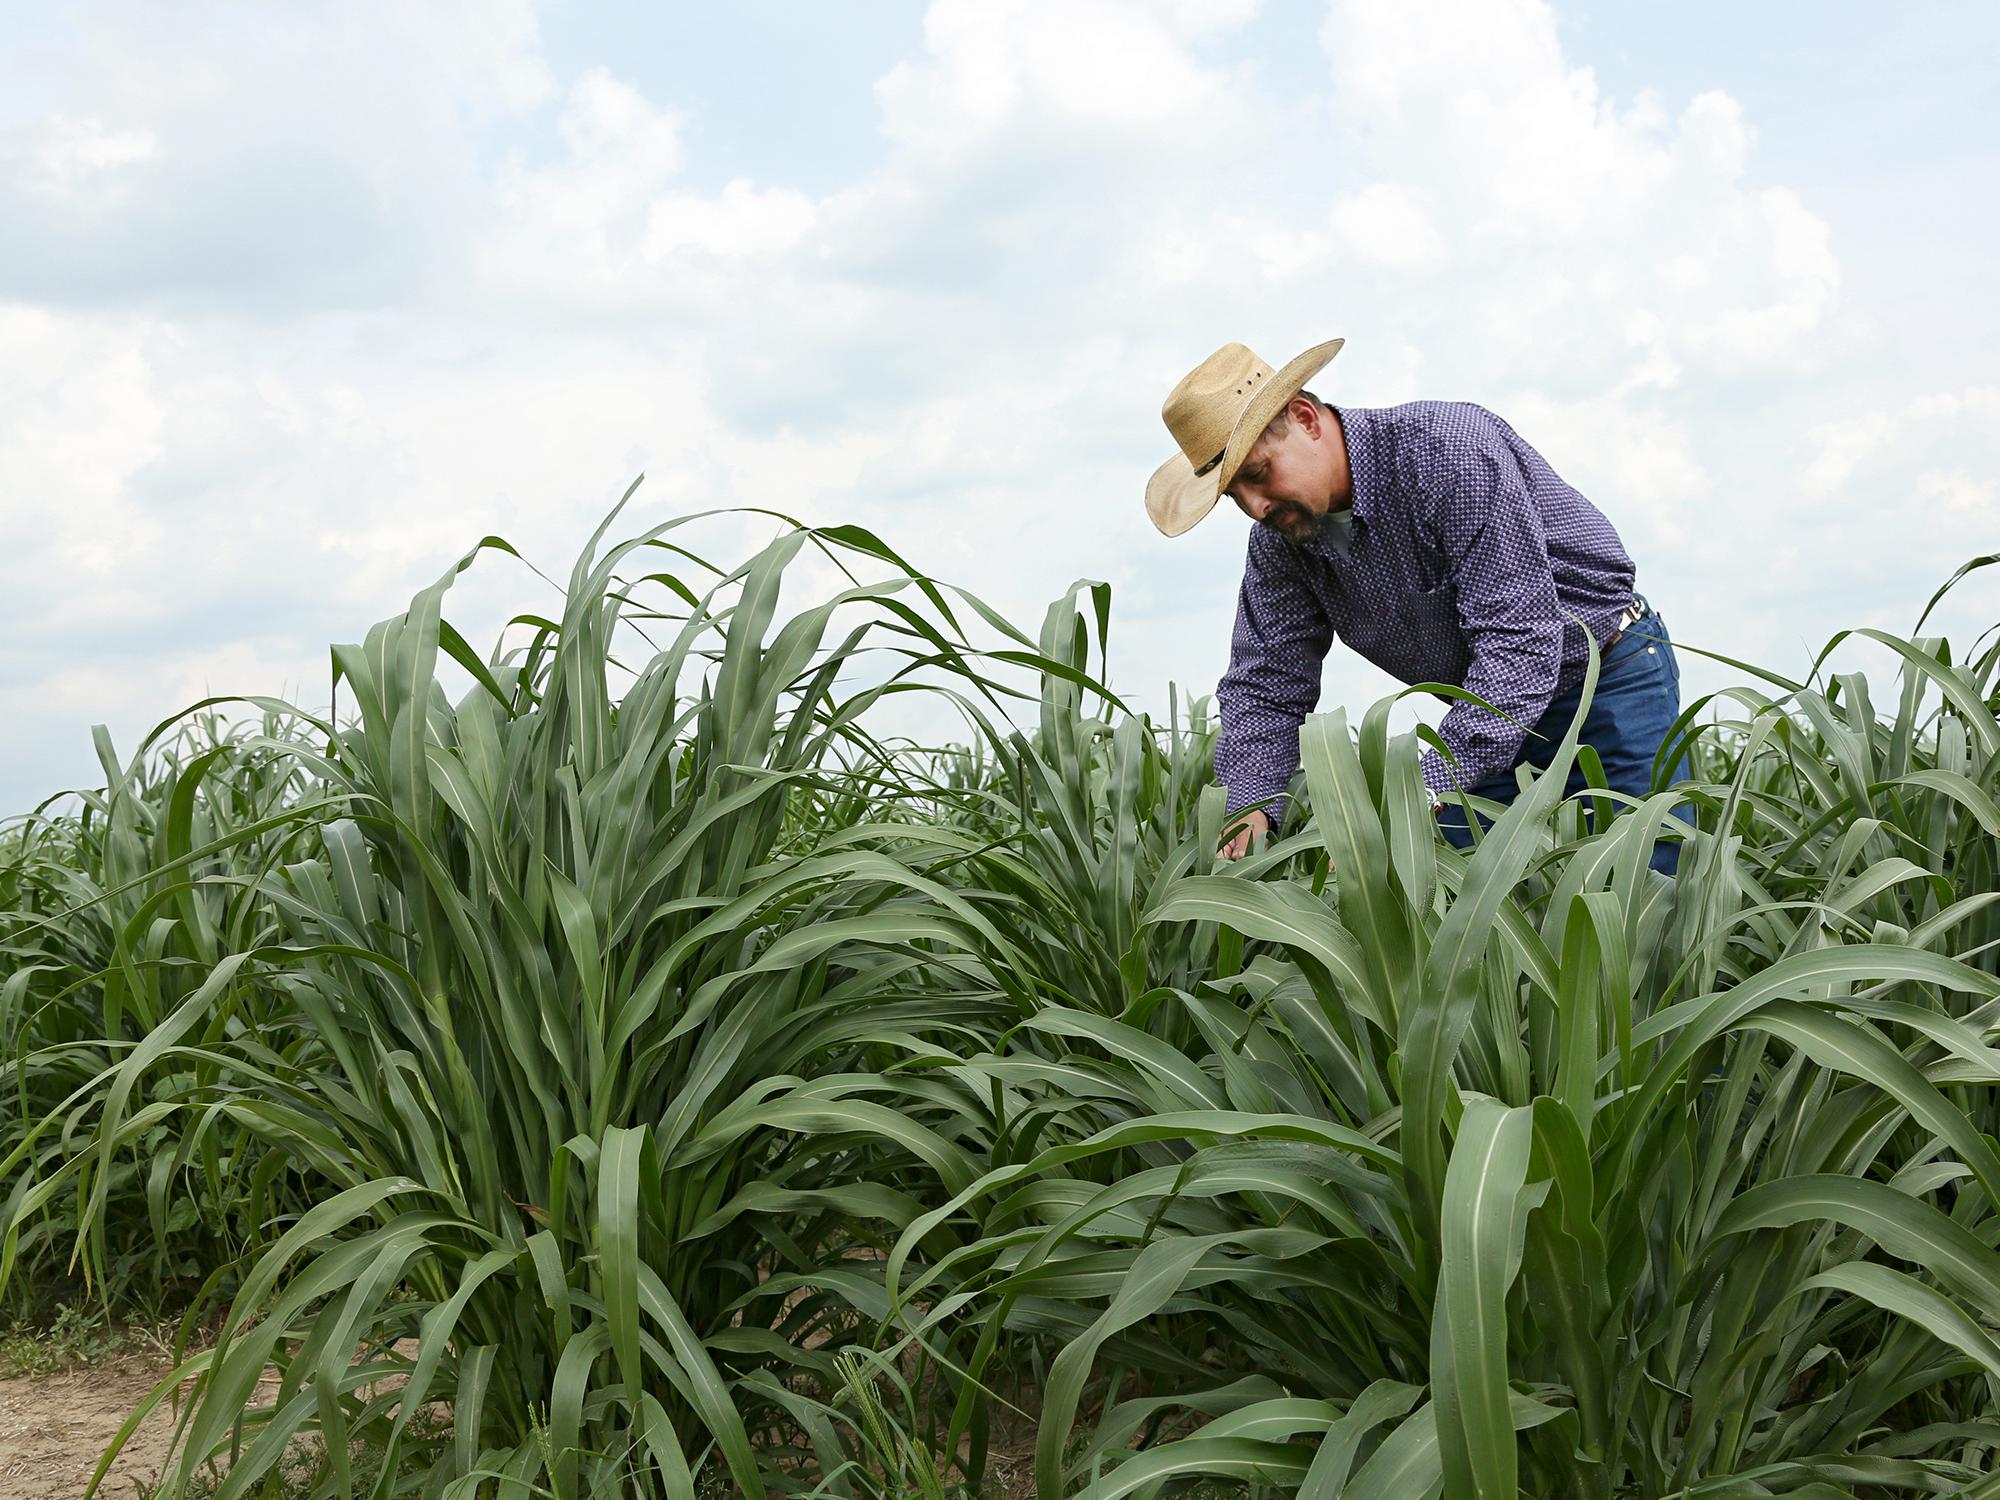 Award-winning forage specialist Rocky Lemus, associate Extension and research professor at Mississippi State University, examines grass growing in 2015 research plots. (MSU Extension Service file photo)